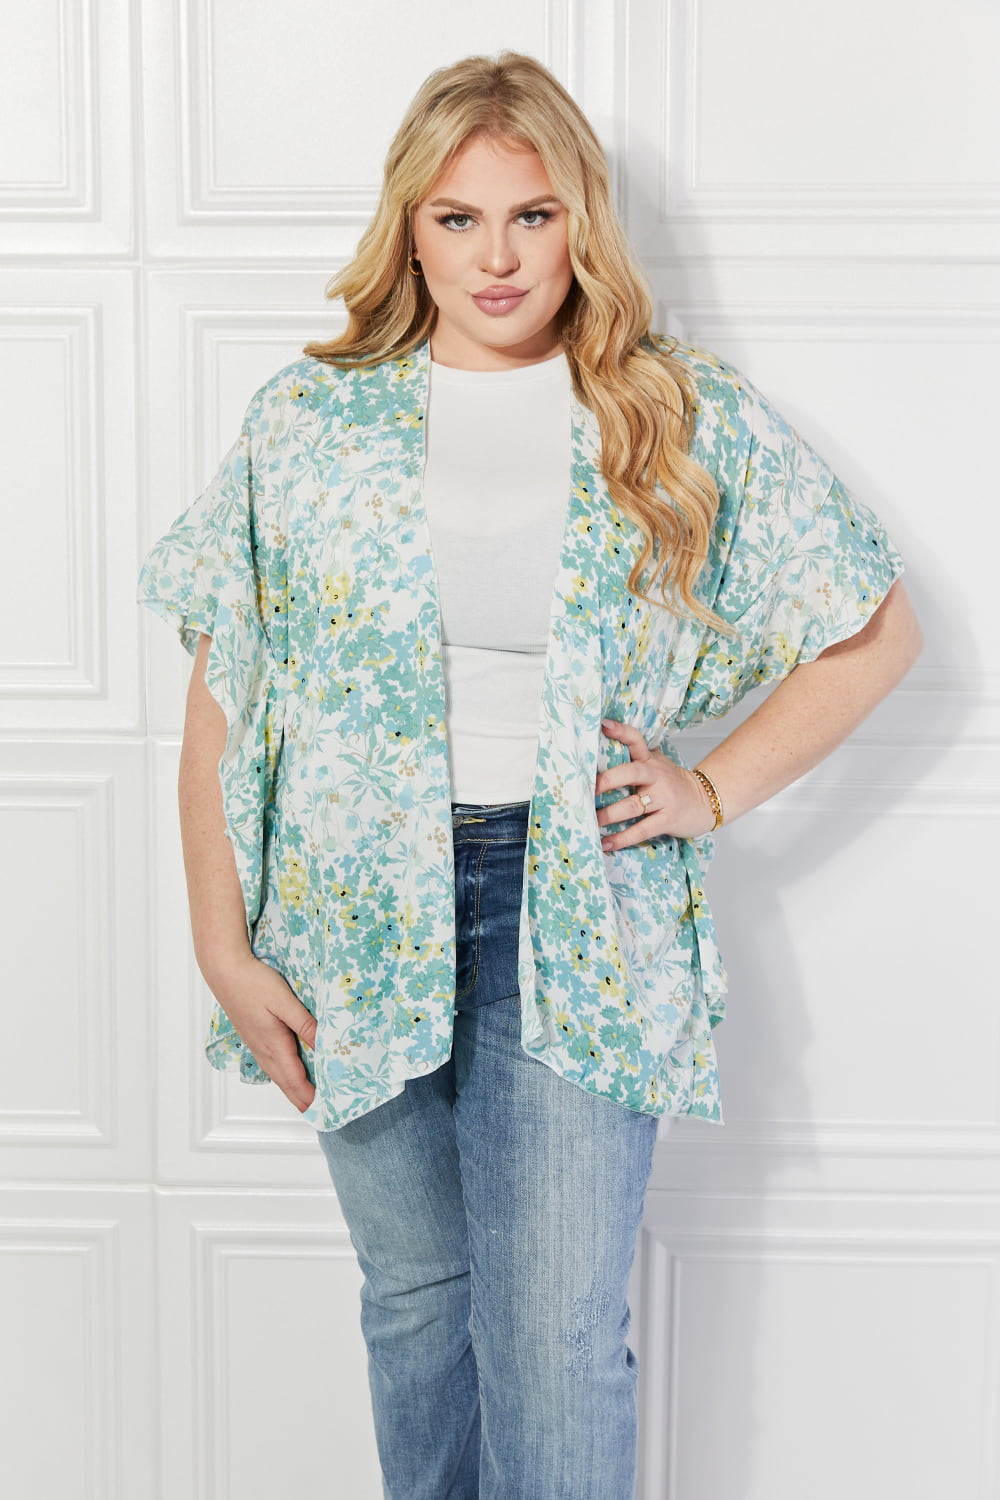 Poppy Floral Kimono in Green - Online Exclusive | Sparkles & Lace Boutique